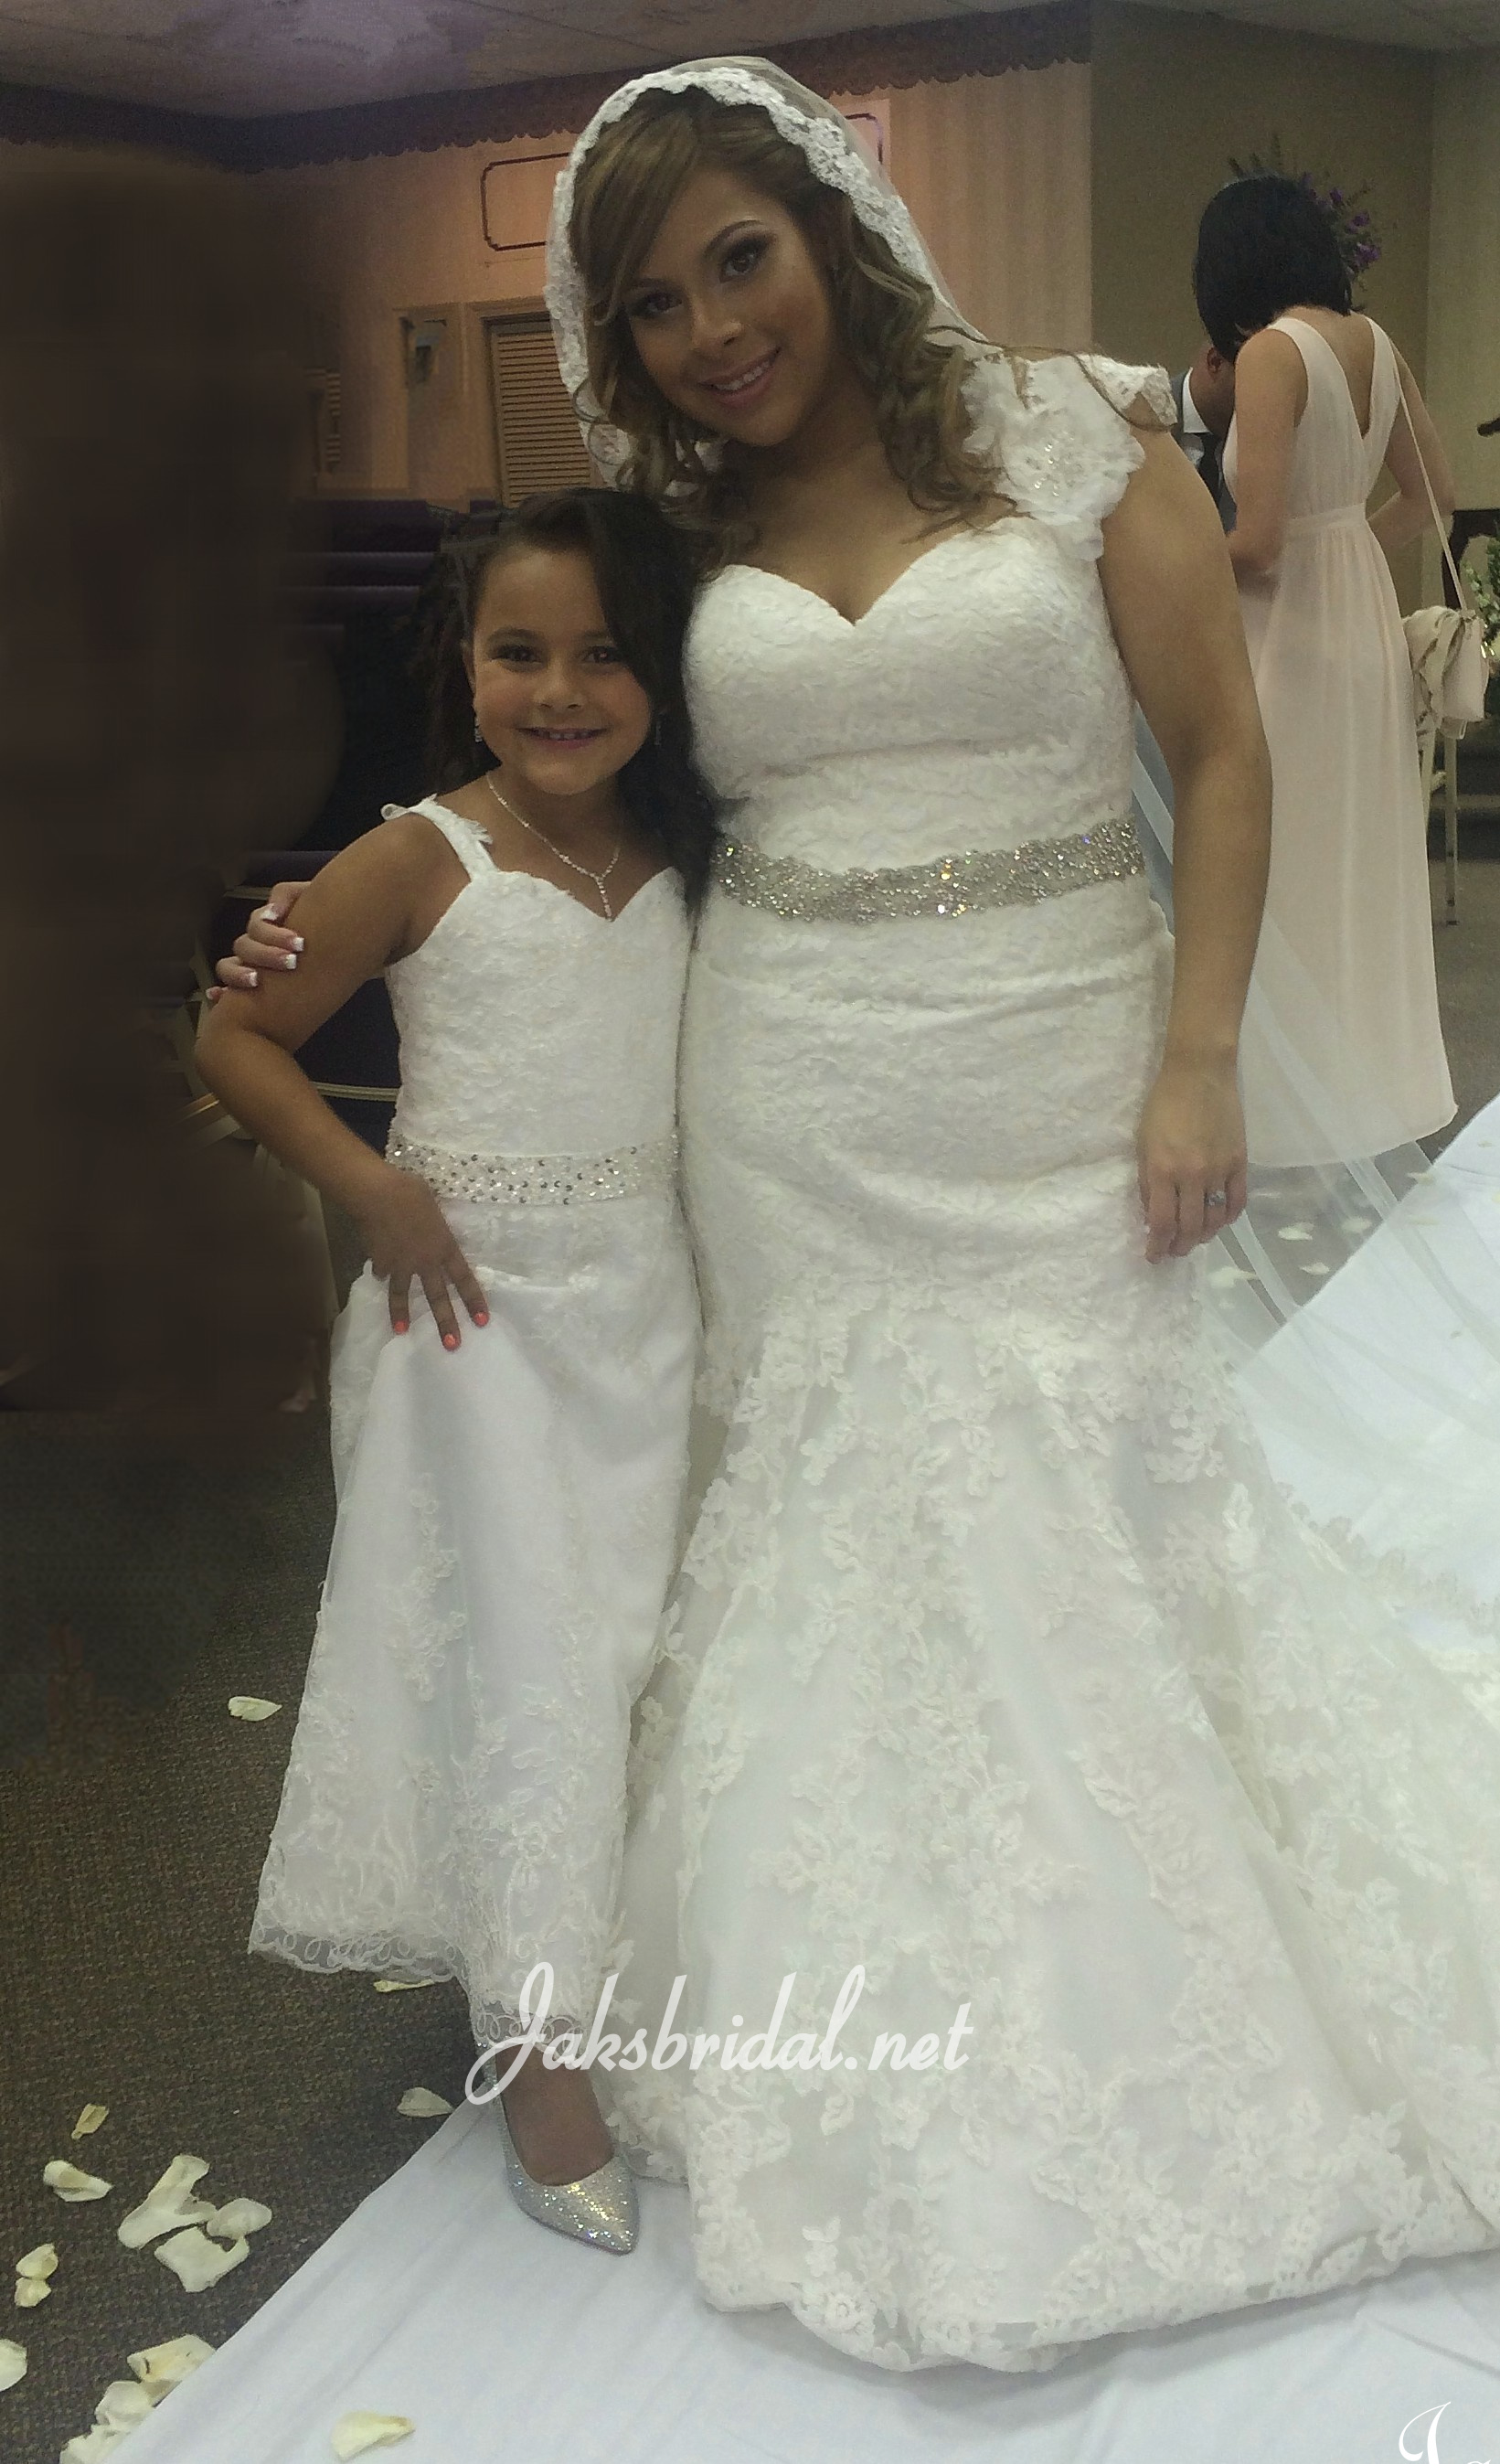 Matching Flower Girl Dresses to Bridal Gowns